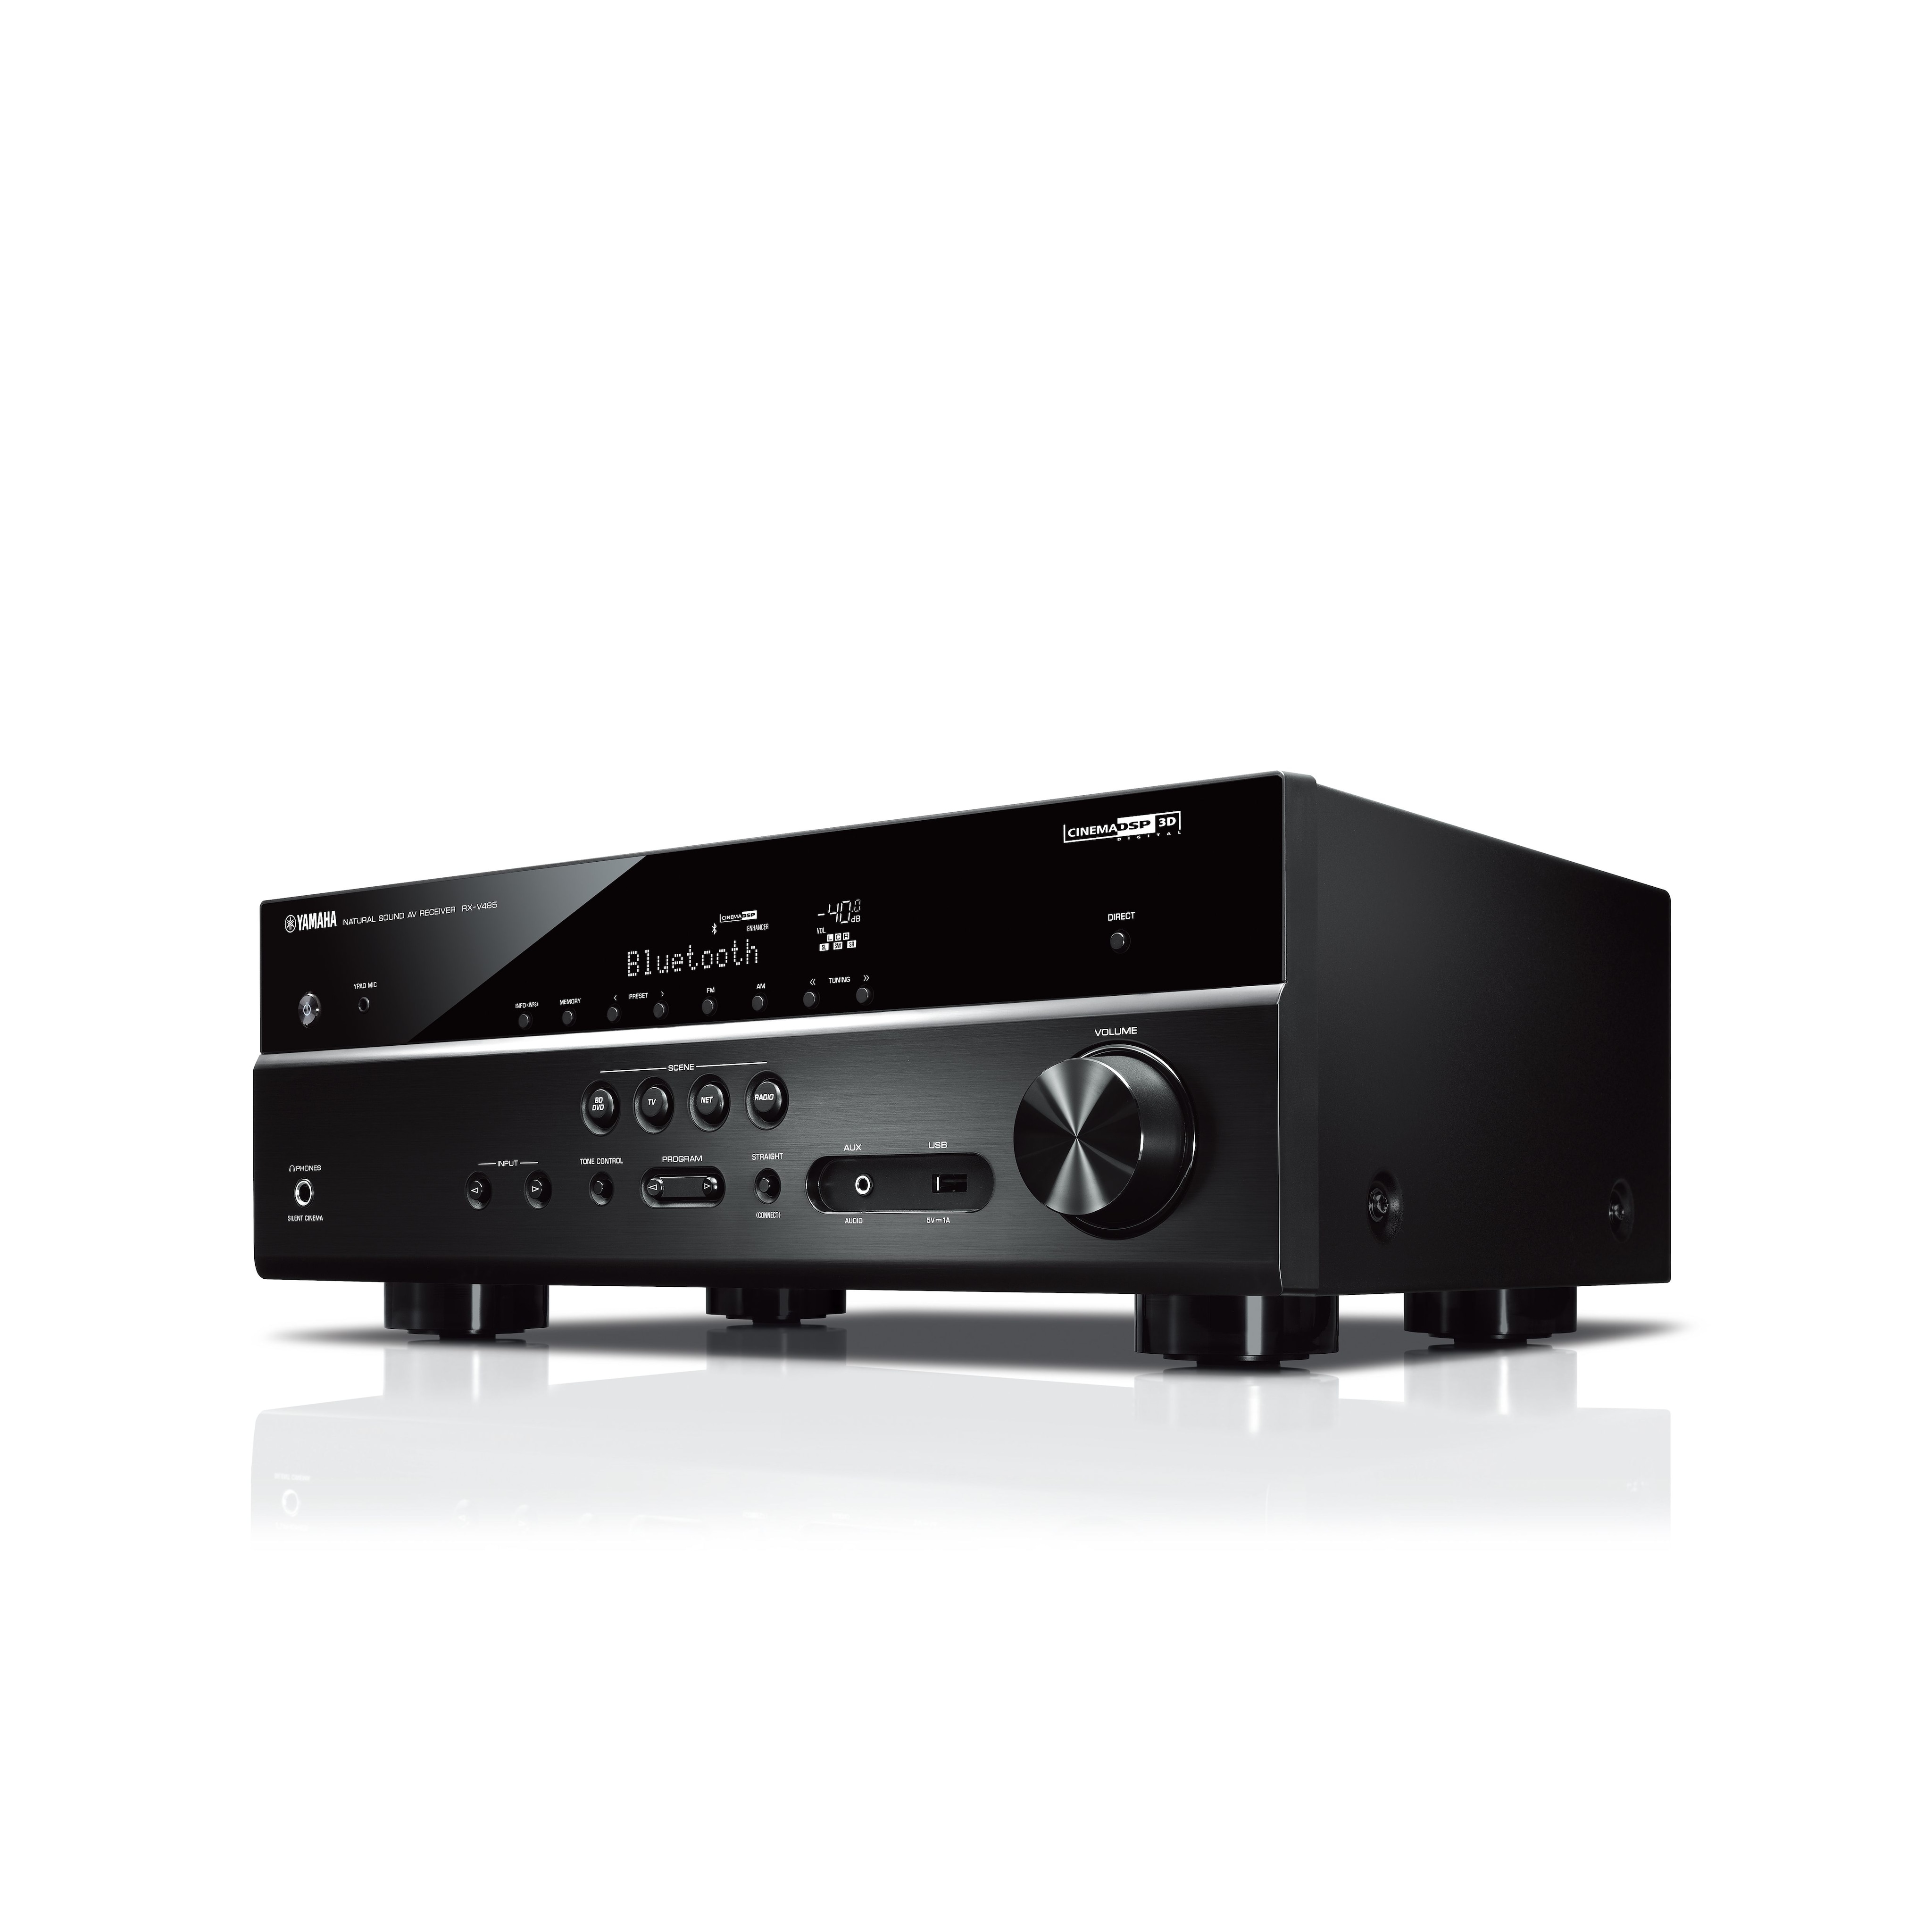 Struikelen Maak los venster RX-V485 - Overview - AV Receivers - Audio & Visual - Products - Yamaha USA